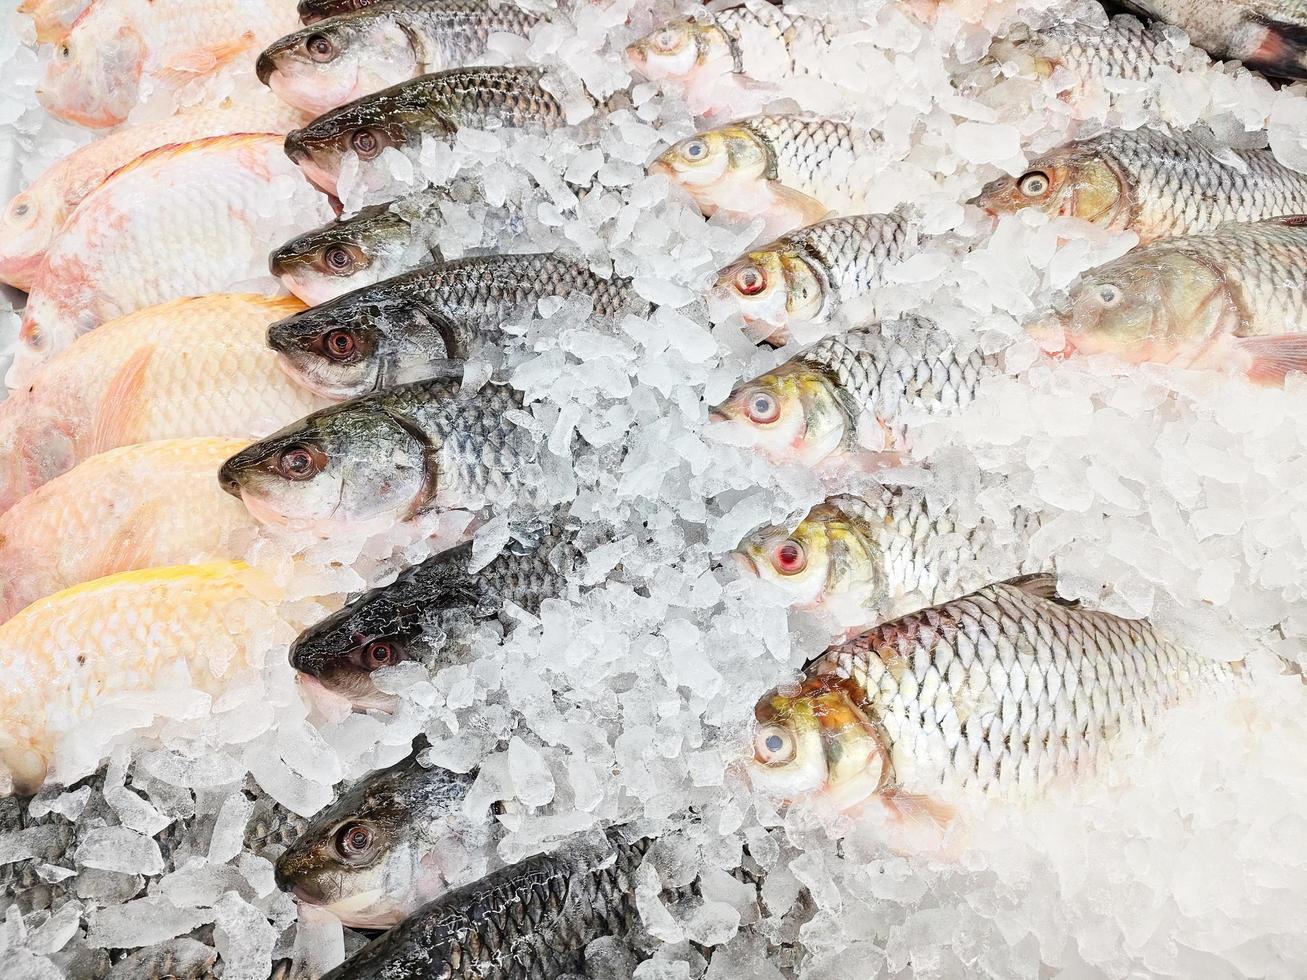 Fresh Silver barb fish for sale in the market seafood restaurant, raw carp fish on ice photo